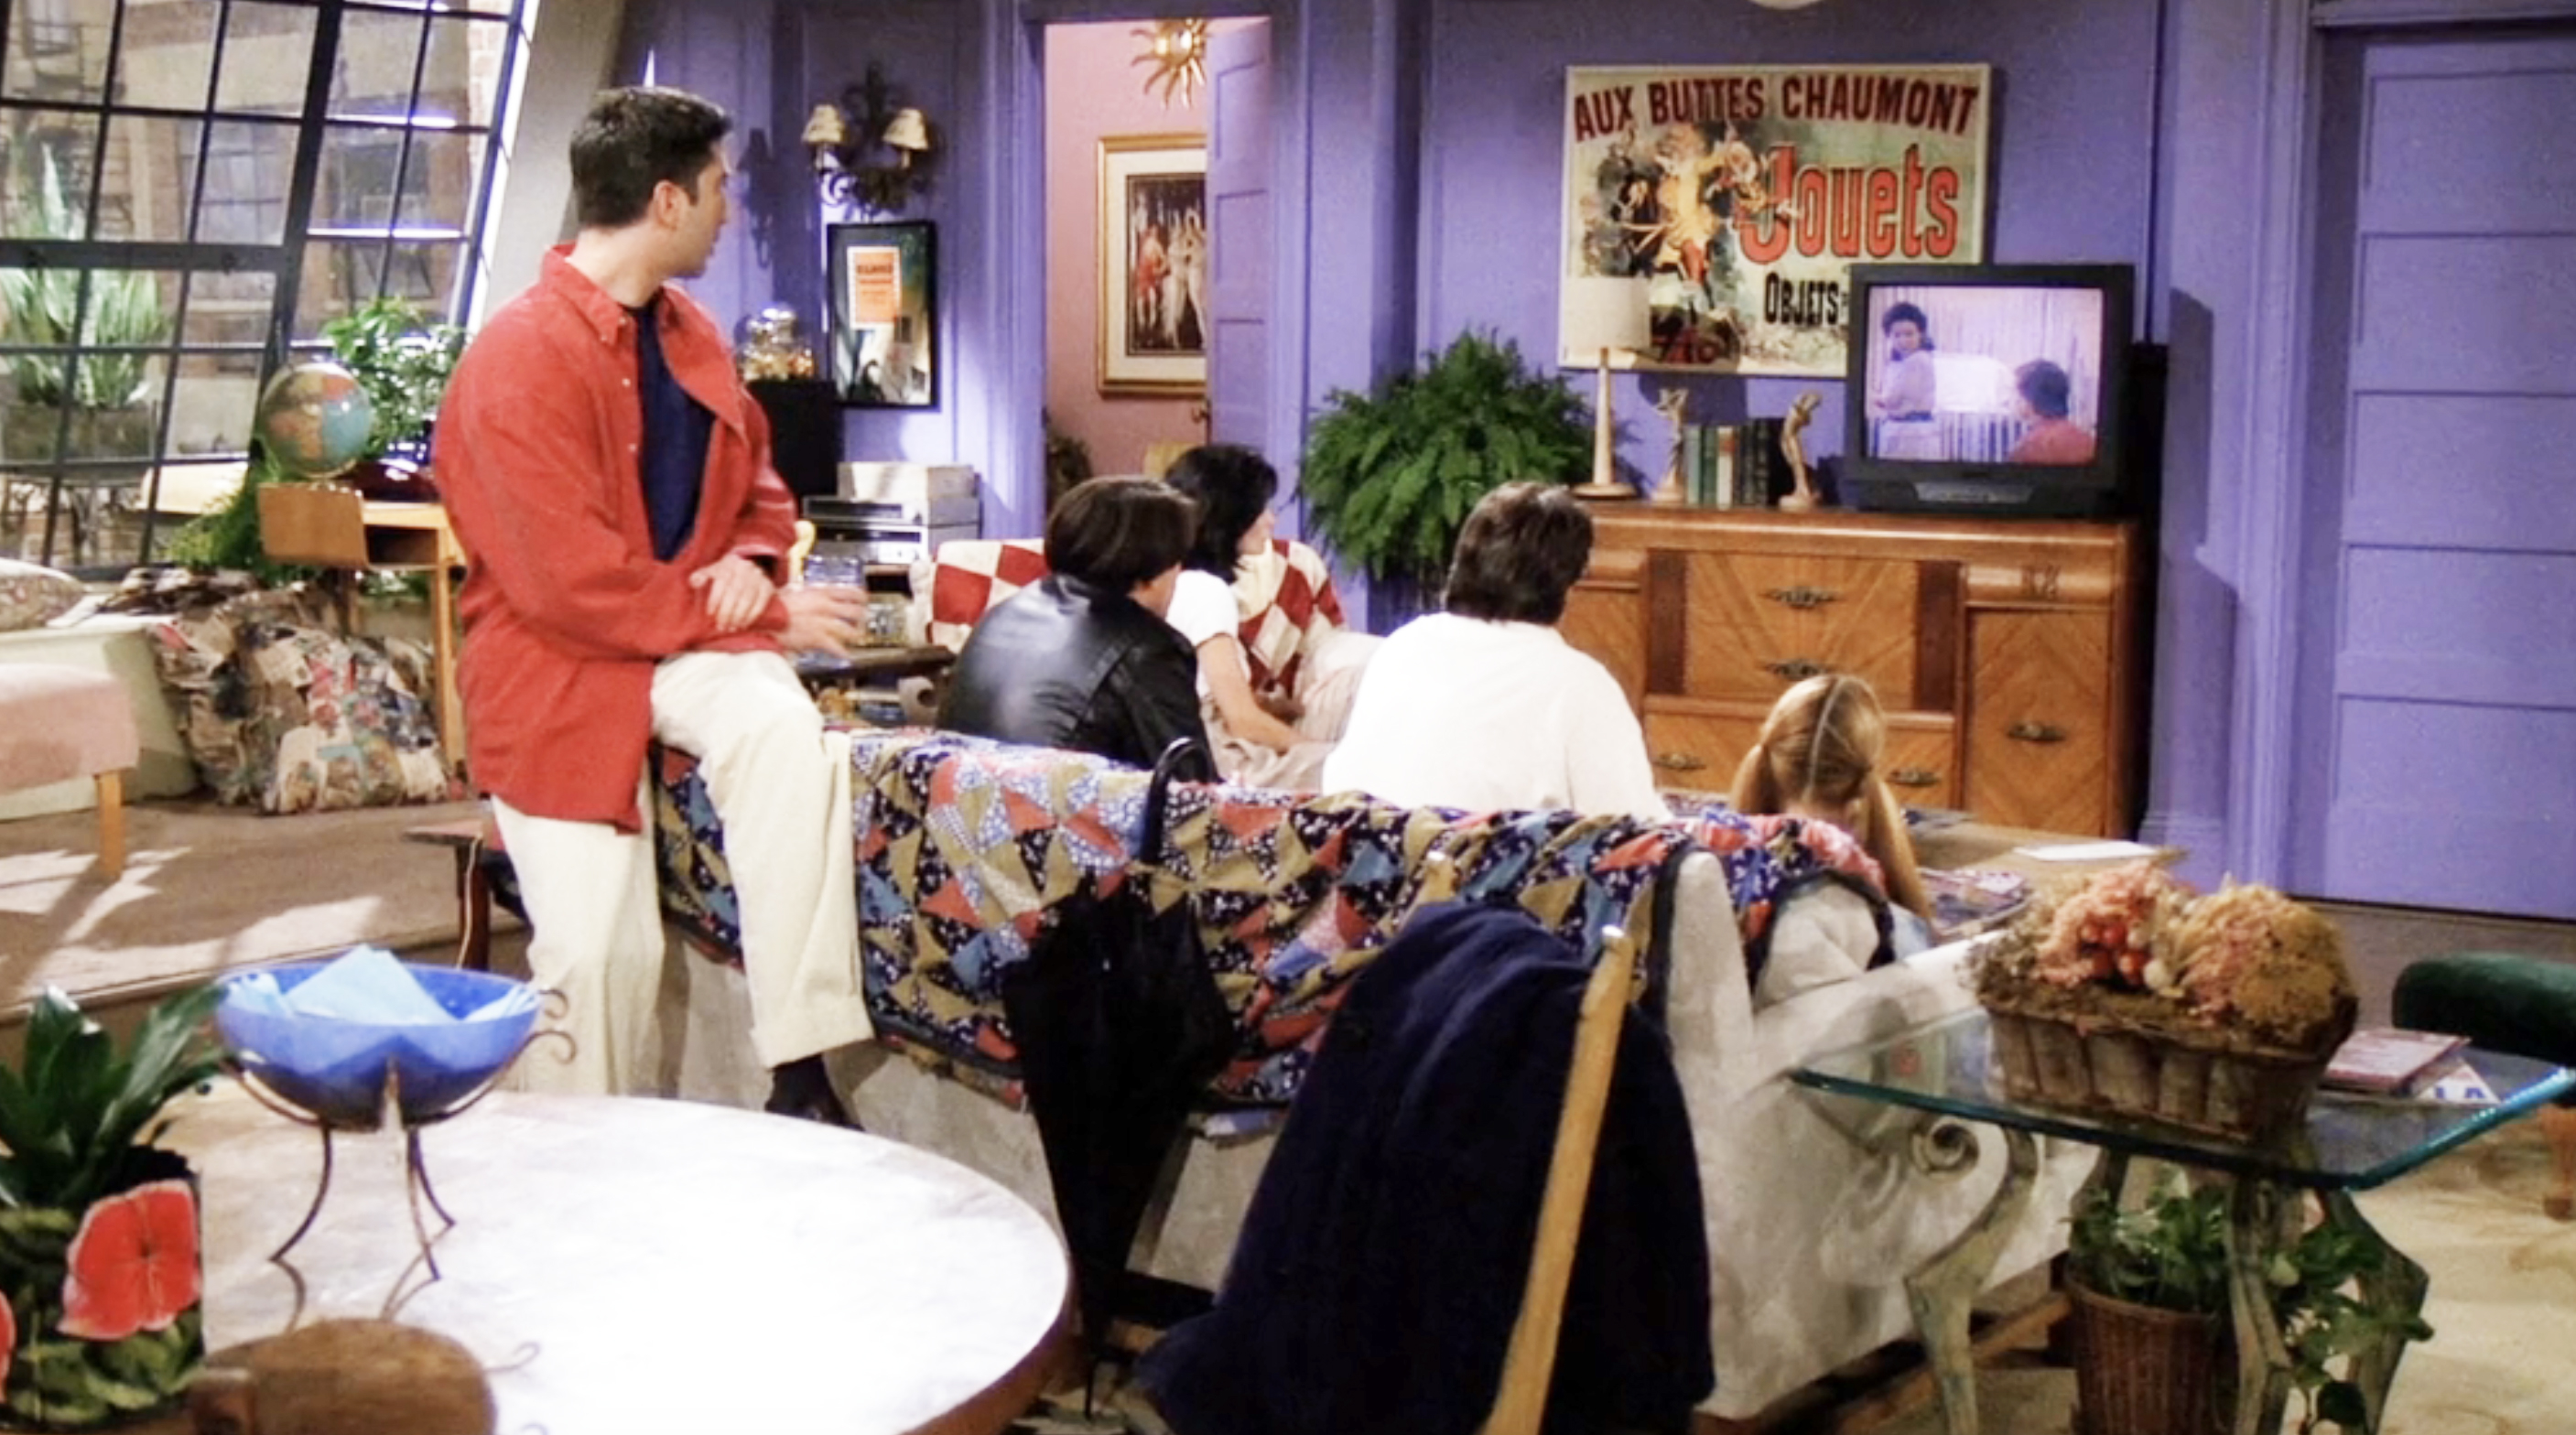 the friends hanging in the purple apartment